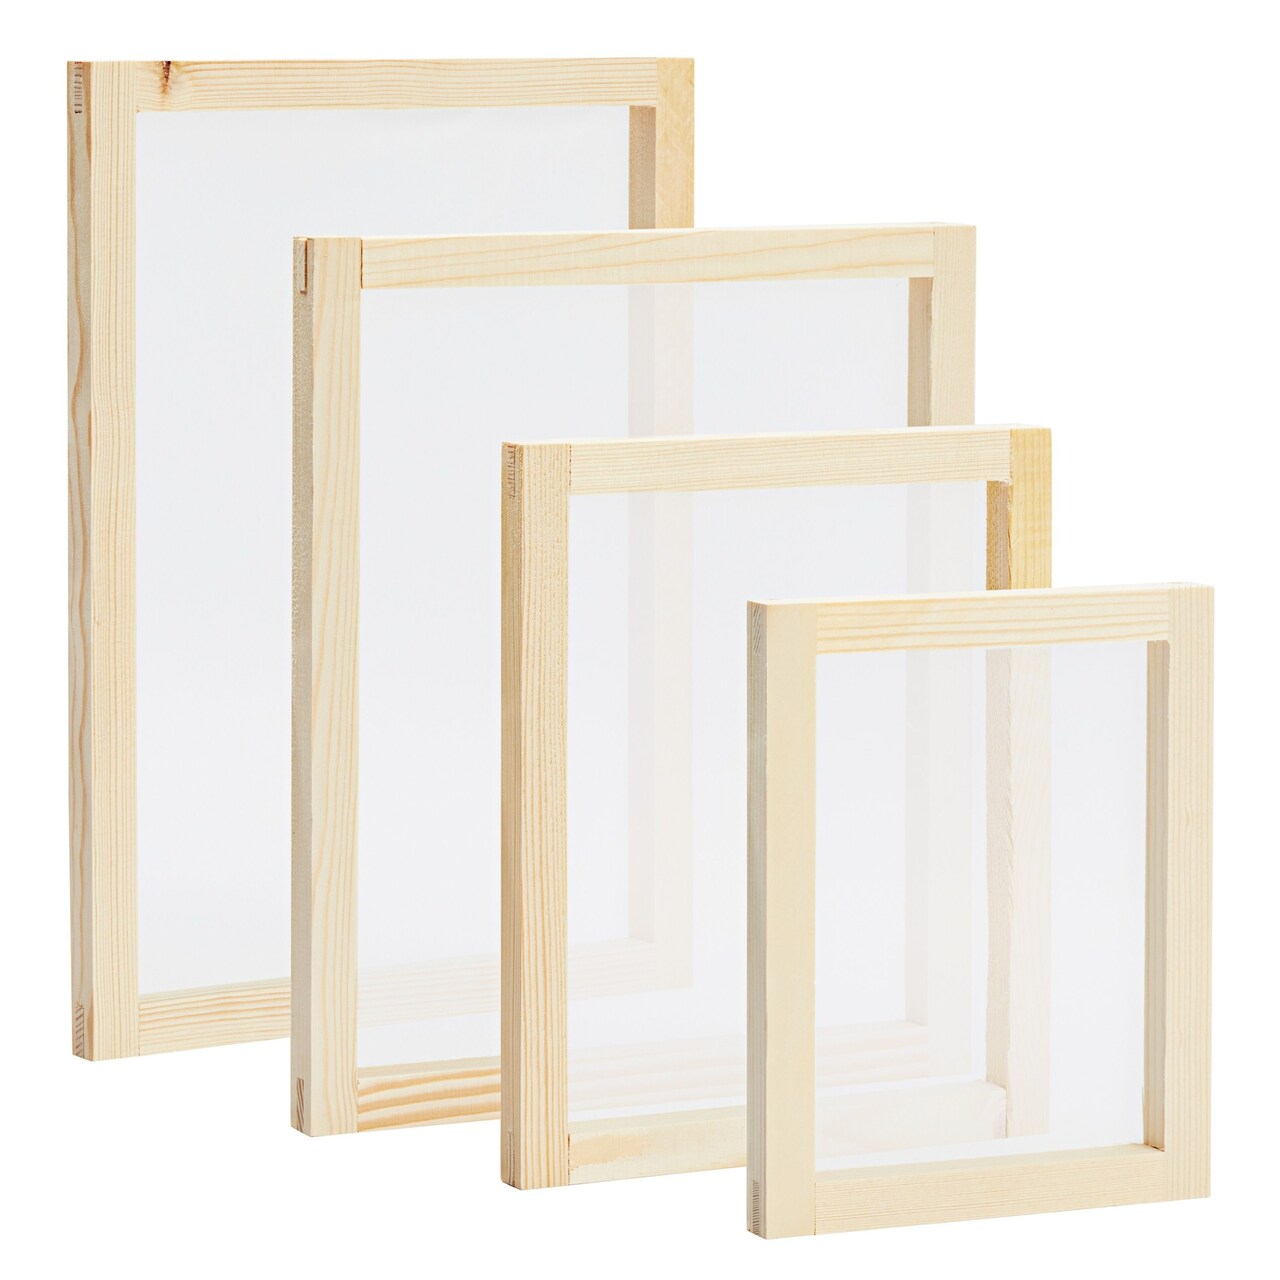 4-Piece Set Wood Silk Screen Printing Frame Kit for Beginners and